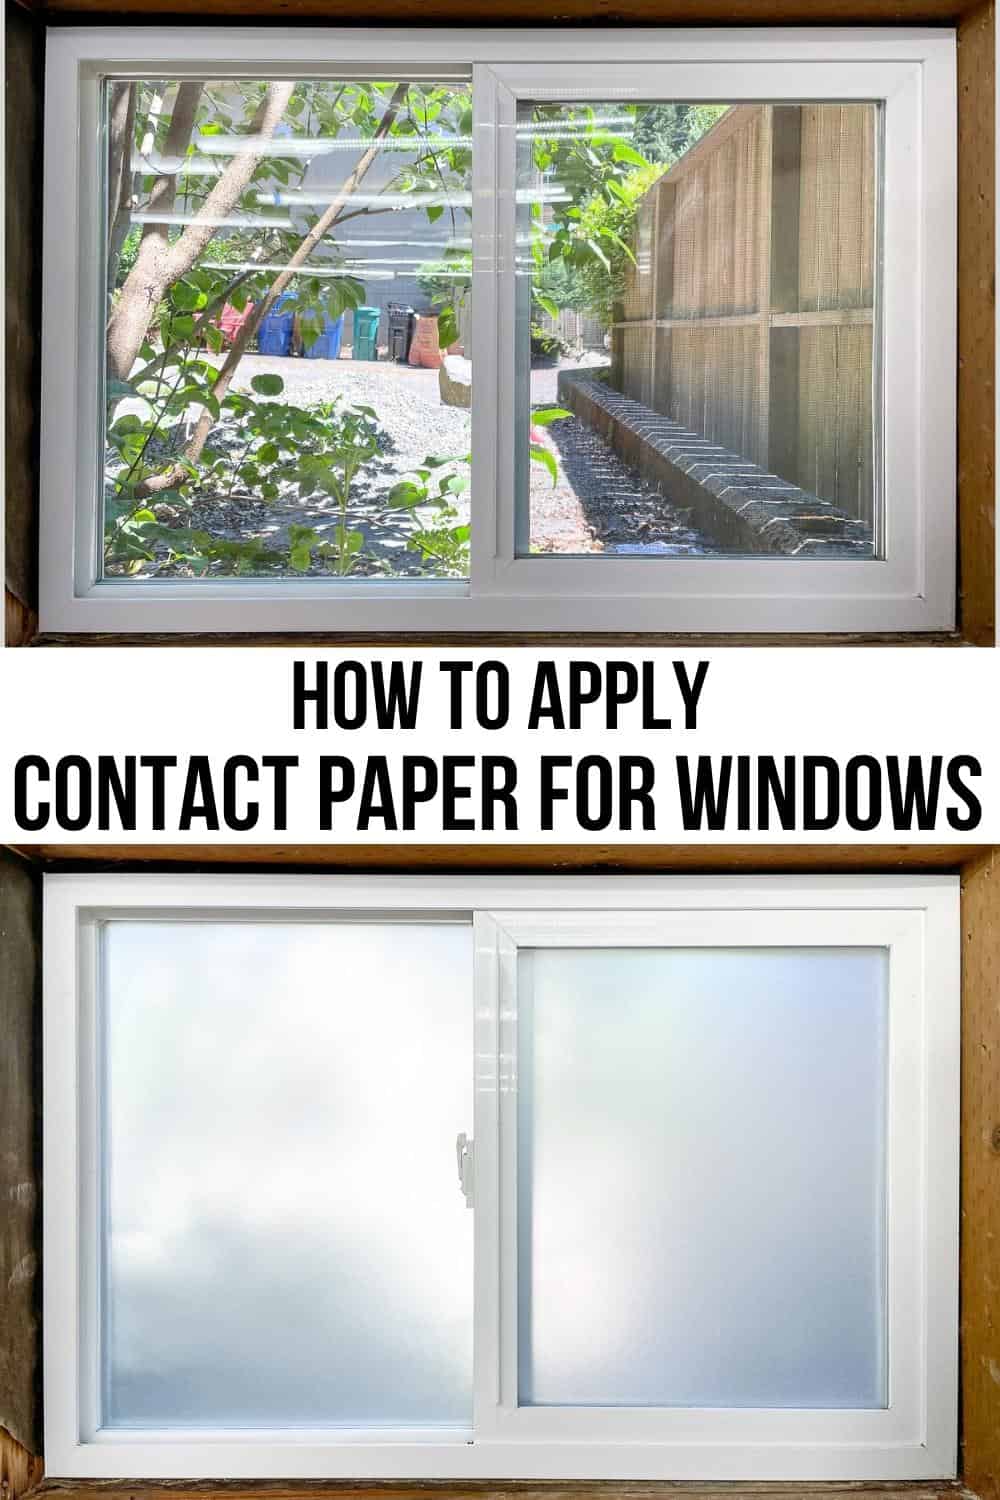 how to apply contact paper for windows with before and after images